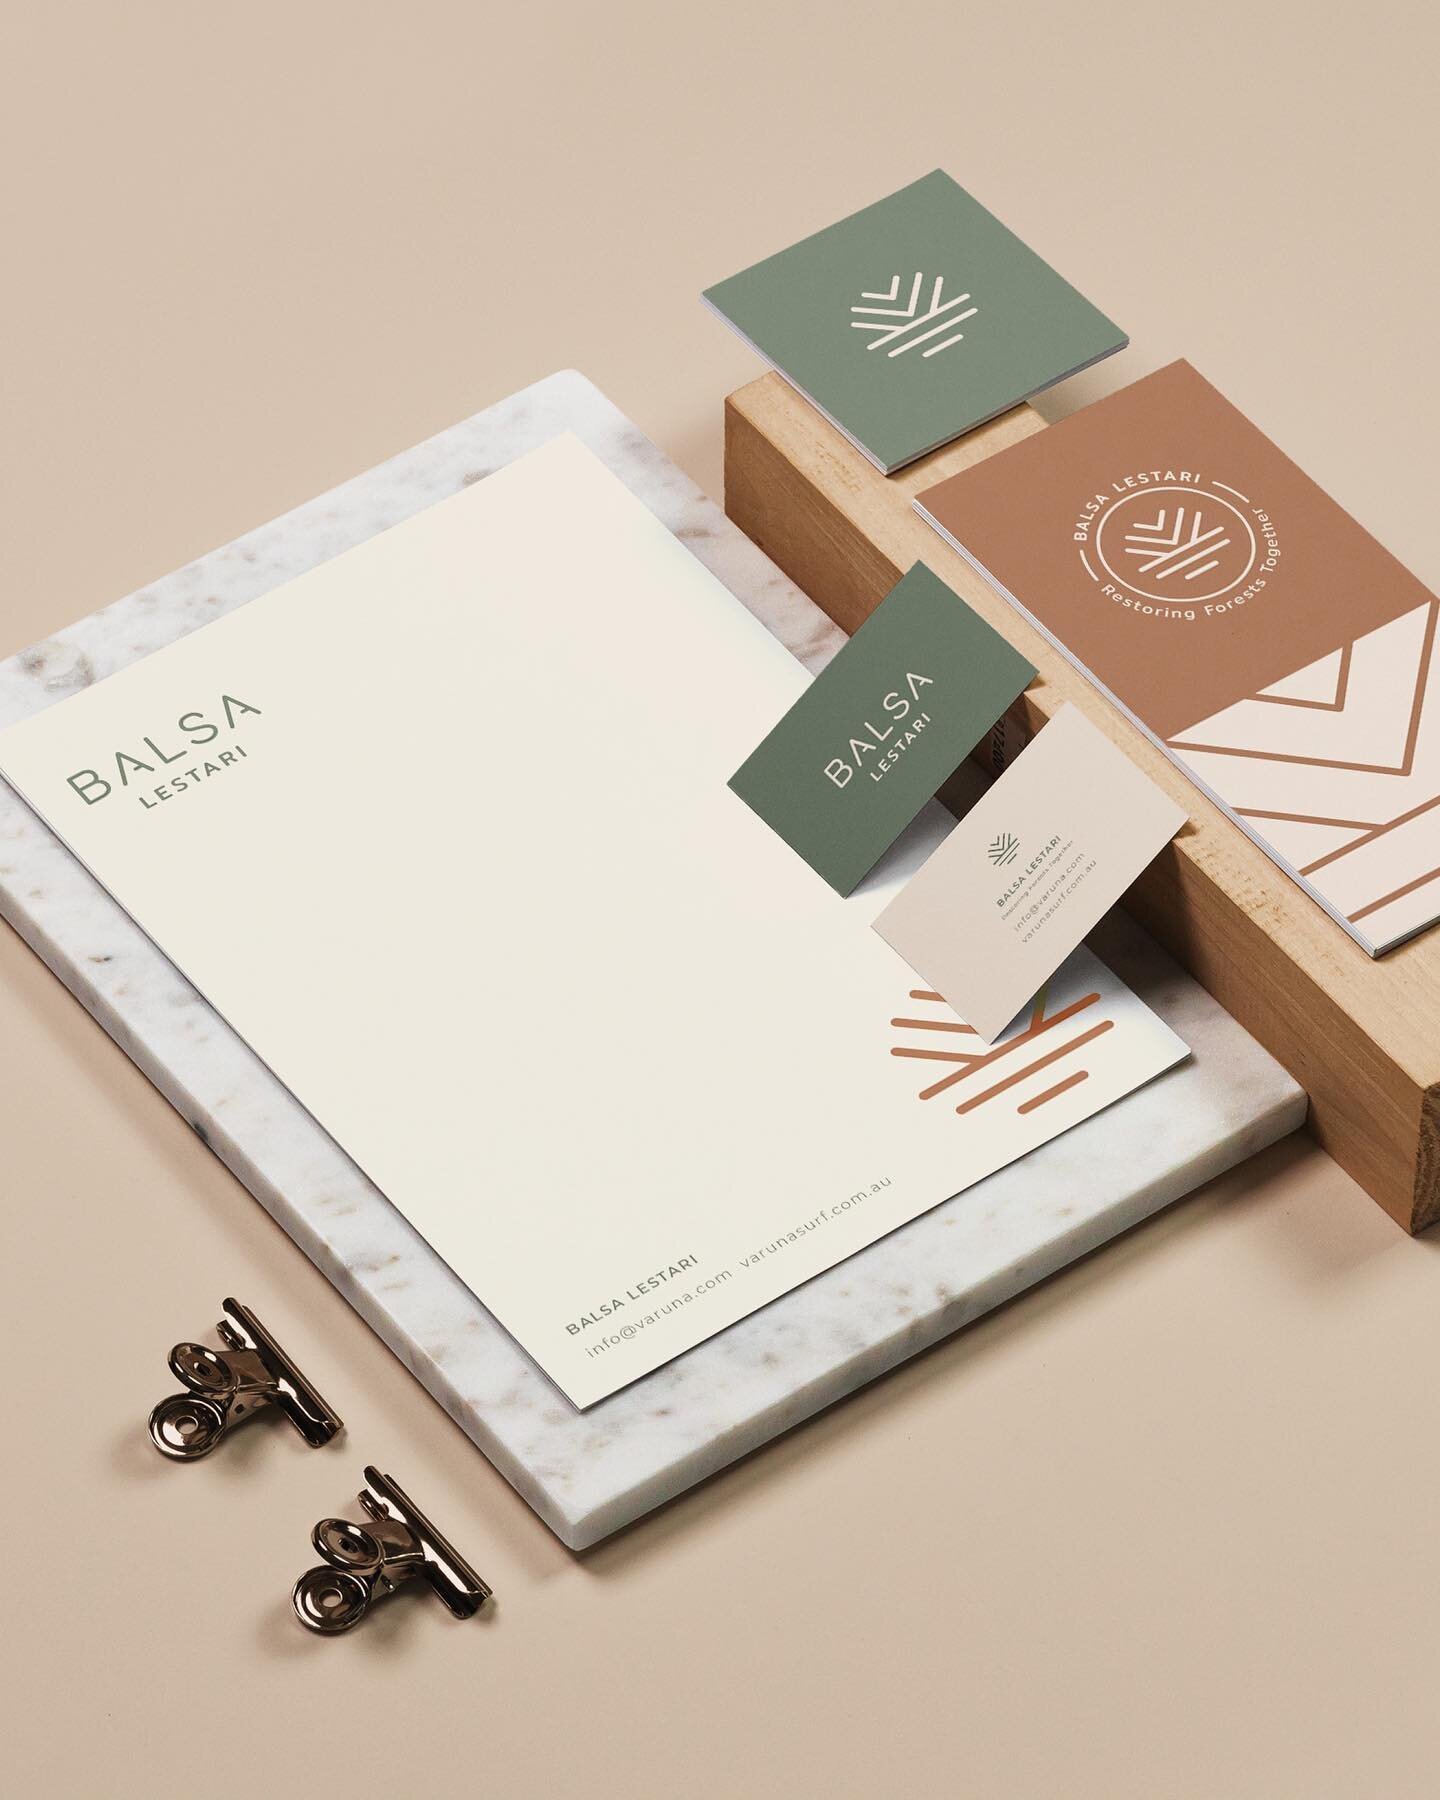 Loved this project and everything about it. Branding design for Balsa Lestari. Restoring forests by planting, growing and harvesting balsa wood, creating a circular sustainable process that allows native plants to thrive.

#studioespe #madebyespe #ar